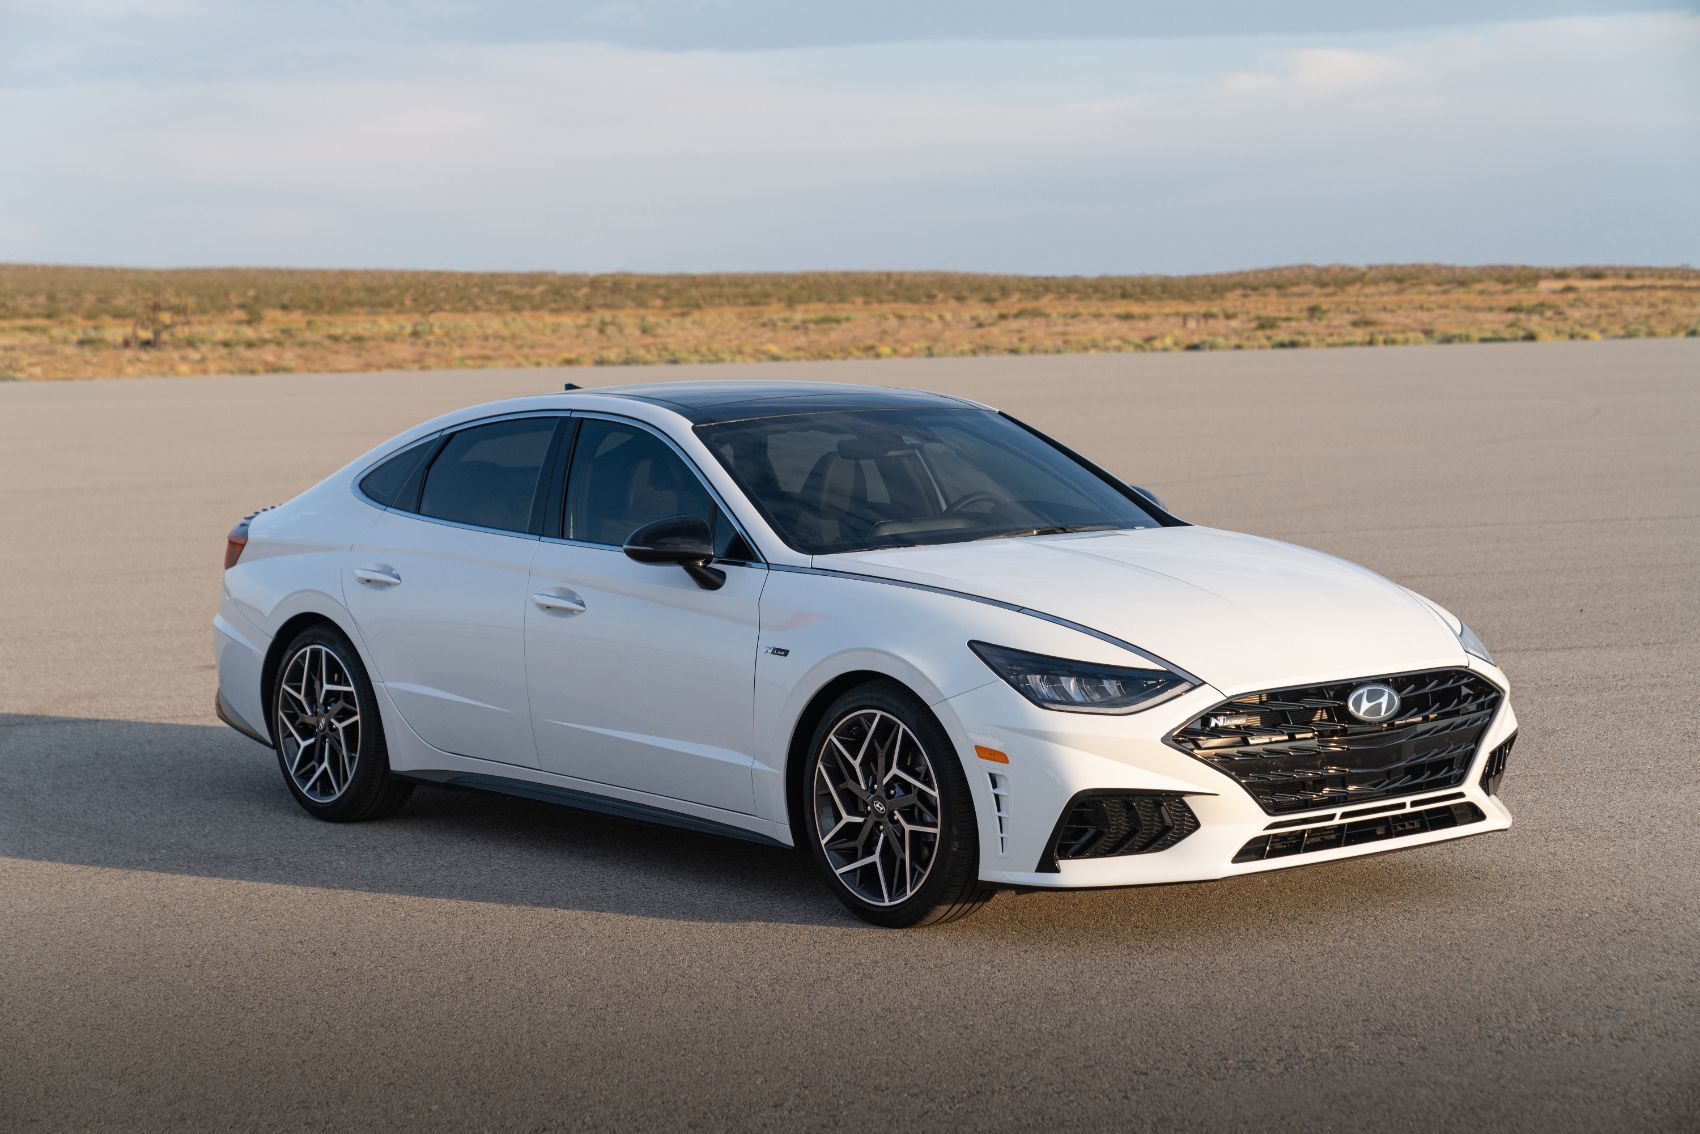 2021 Hyundai Sonata N Line Overview Performance Pricing Standard Features